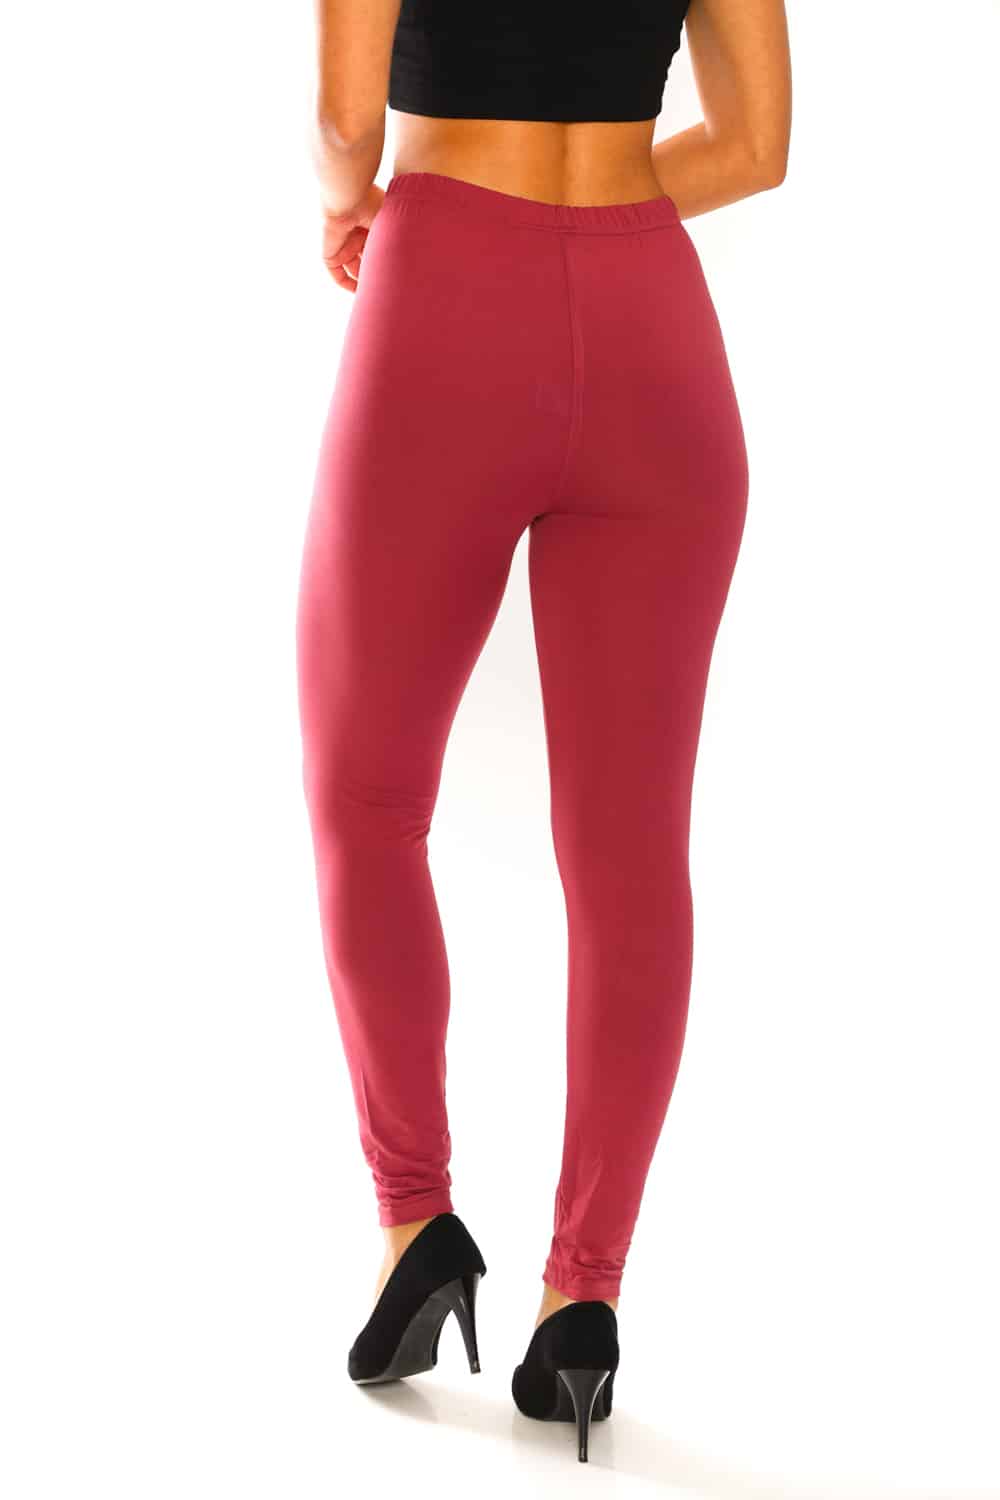 Solid Color 1 Inch Mid Waisted Brushed Ankle Leggings - Its All